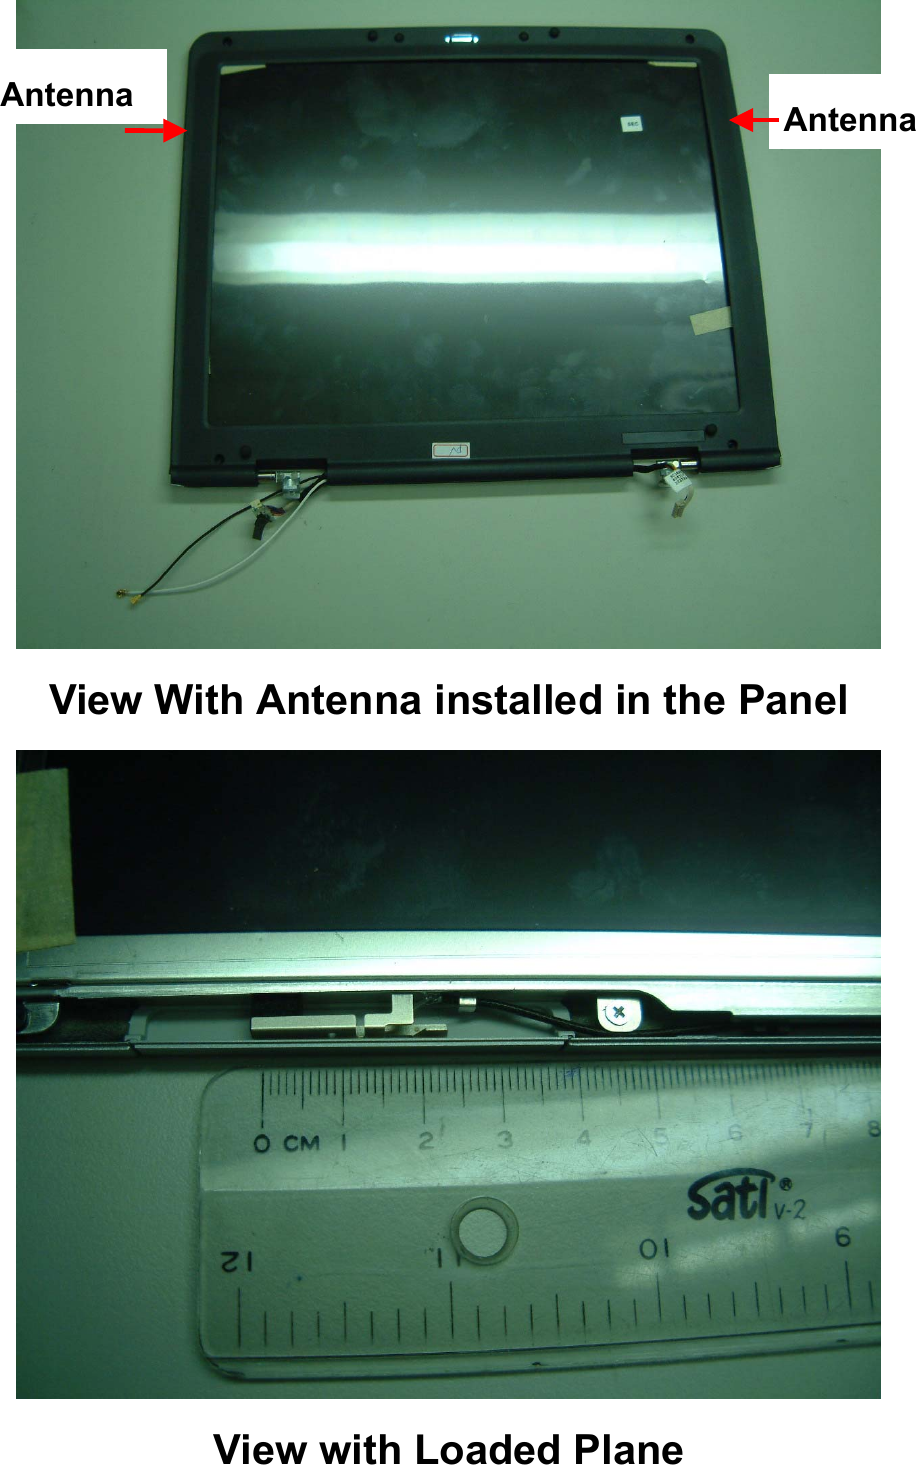 View With Antenna installed in the PanelView with Loaded PlaneAntennaAntenna